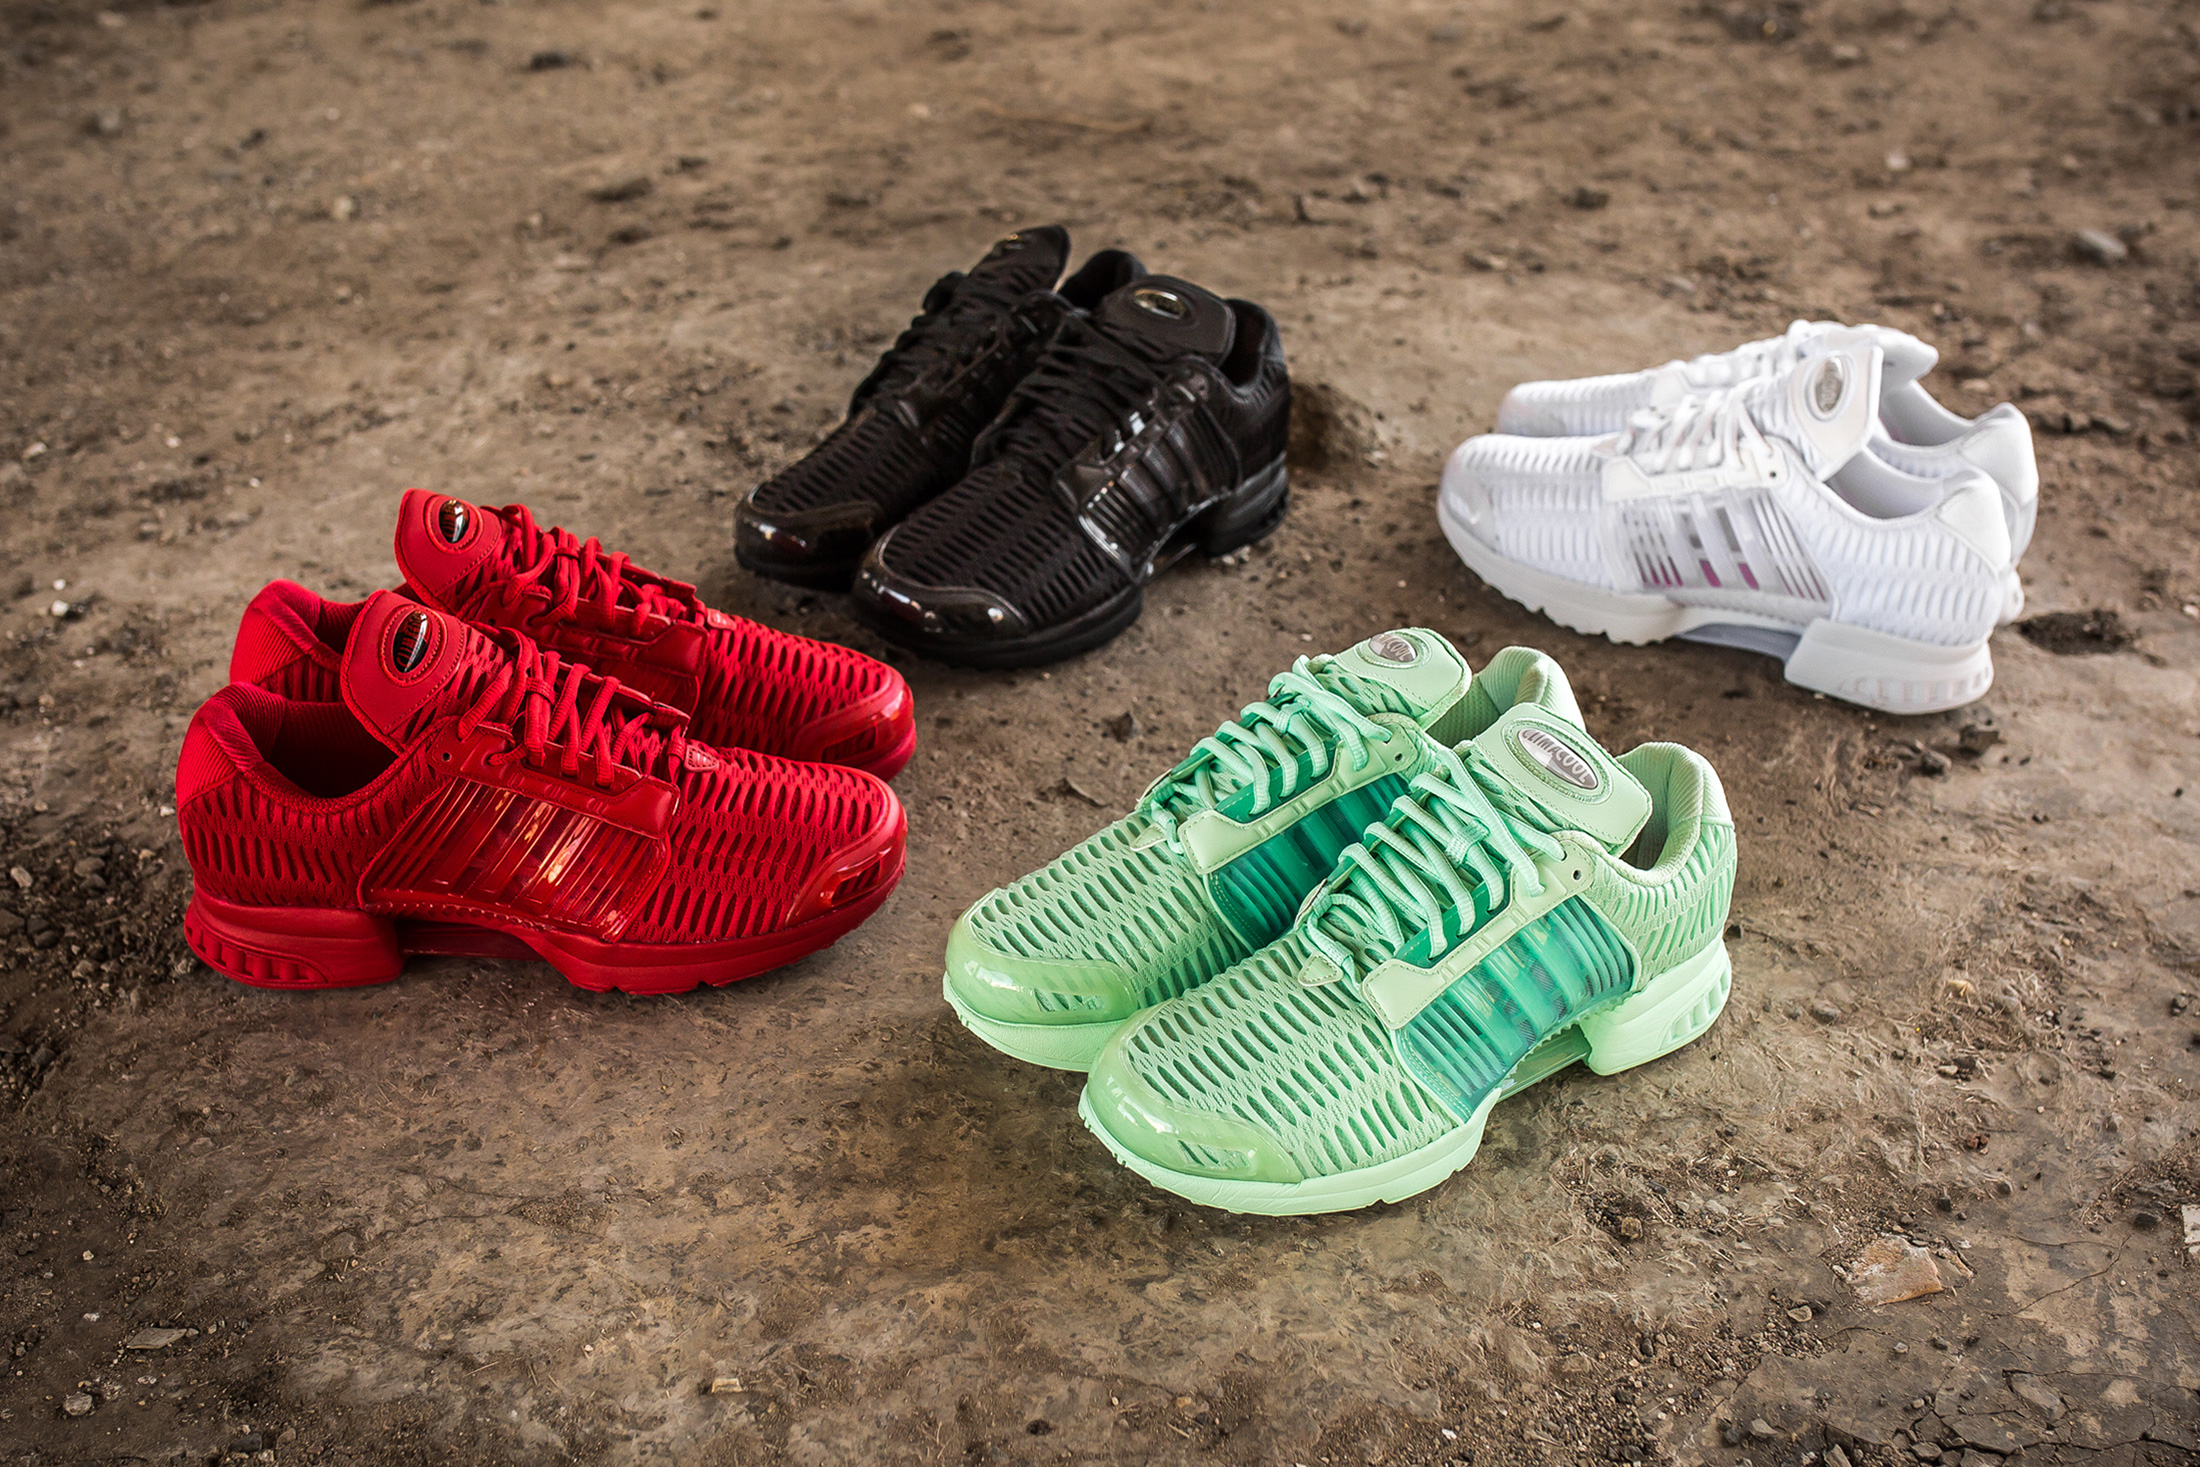 Take a Good Look at the adidas Climacool Pack' -